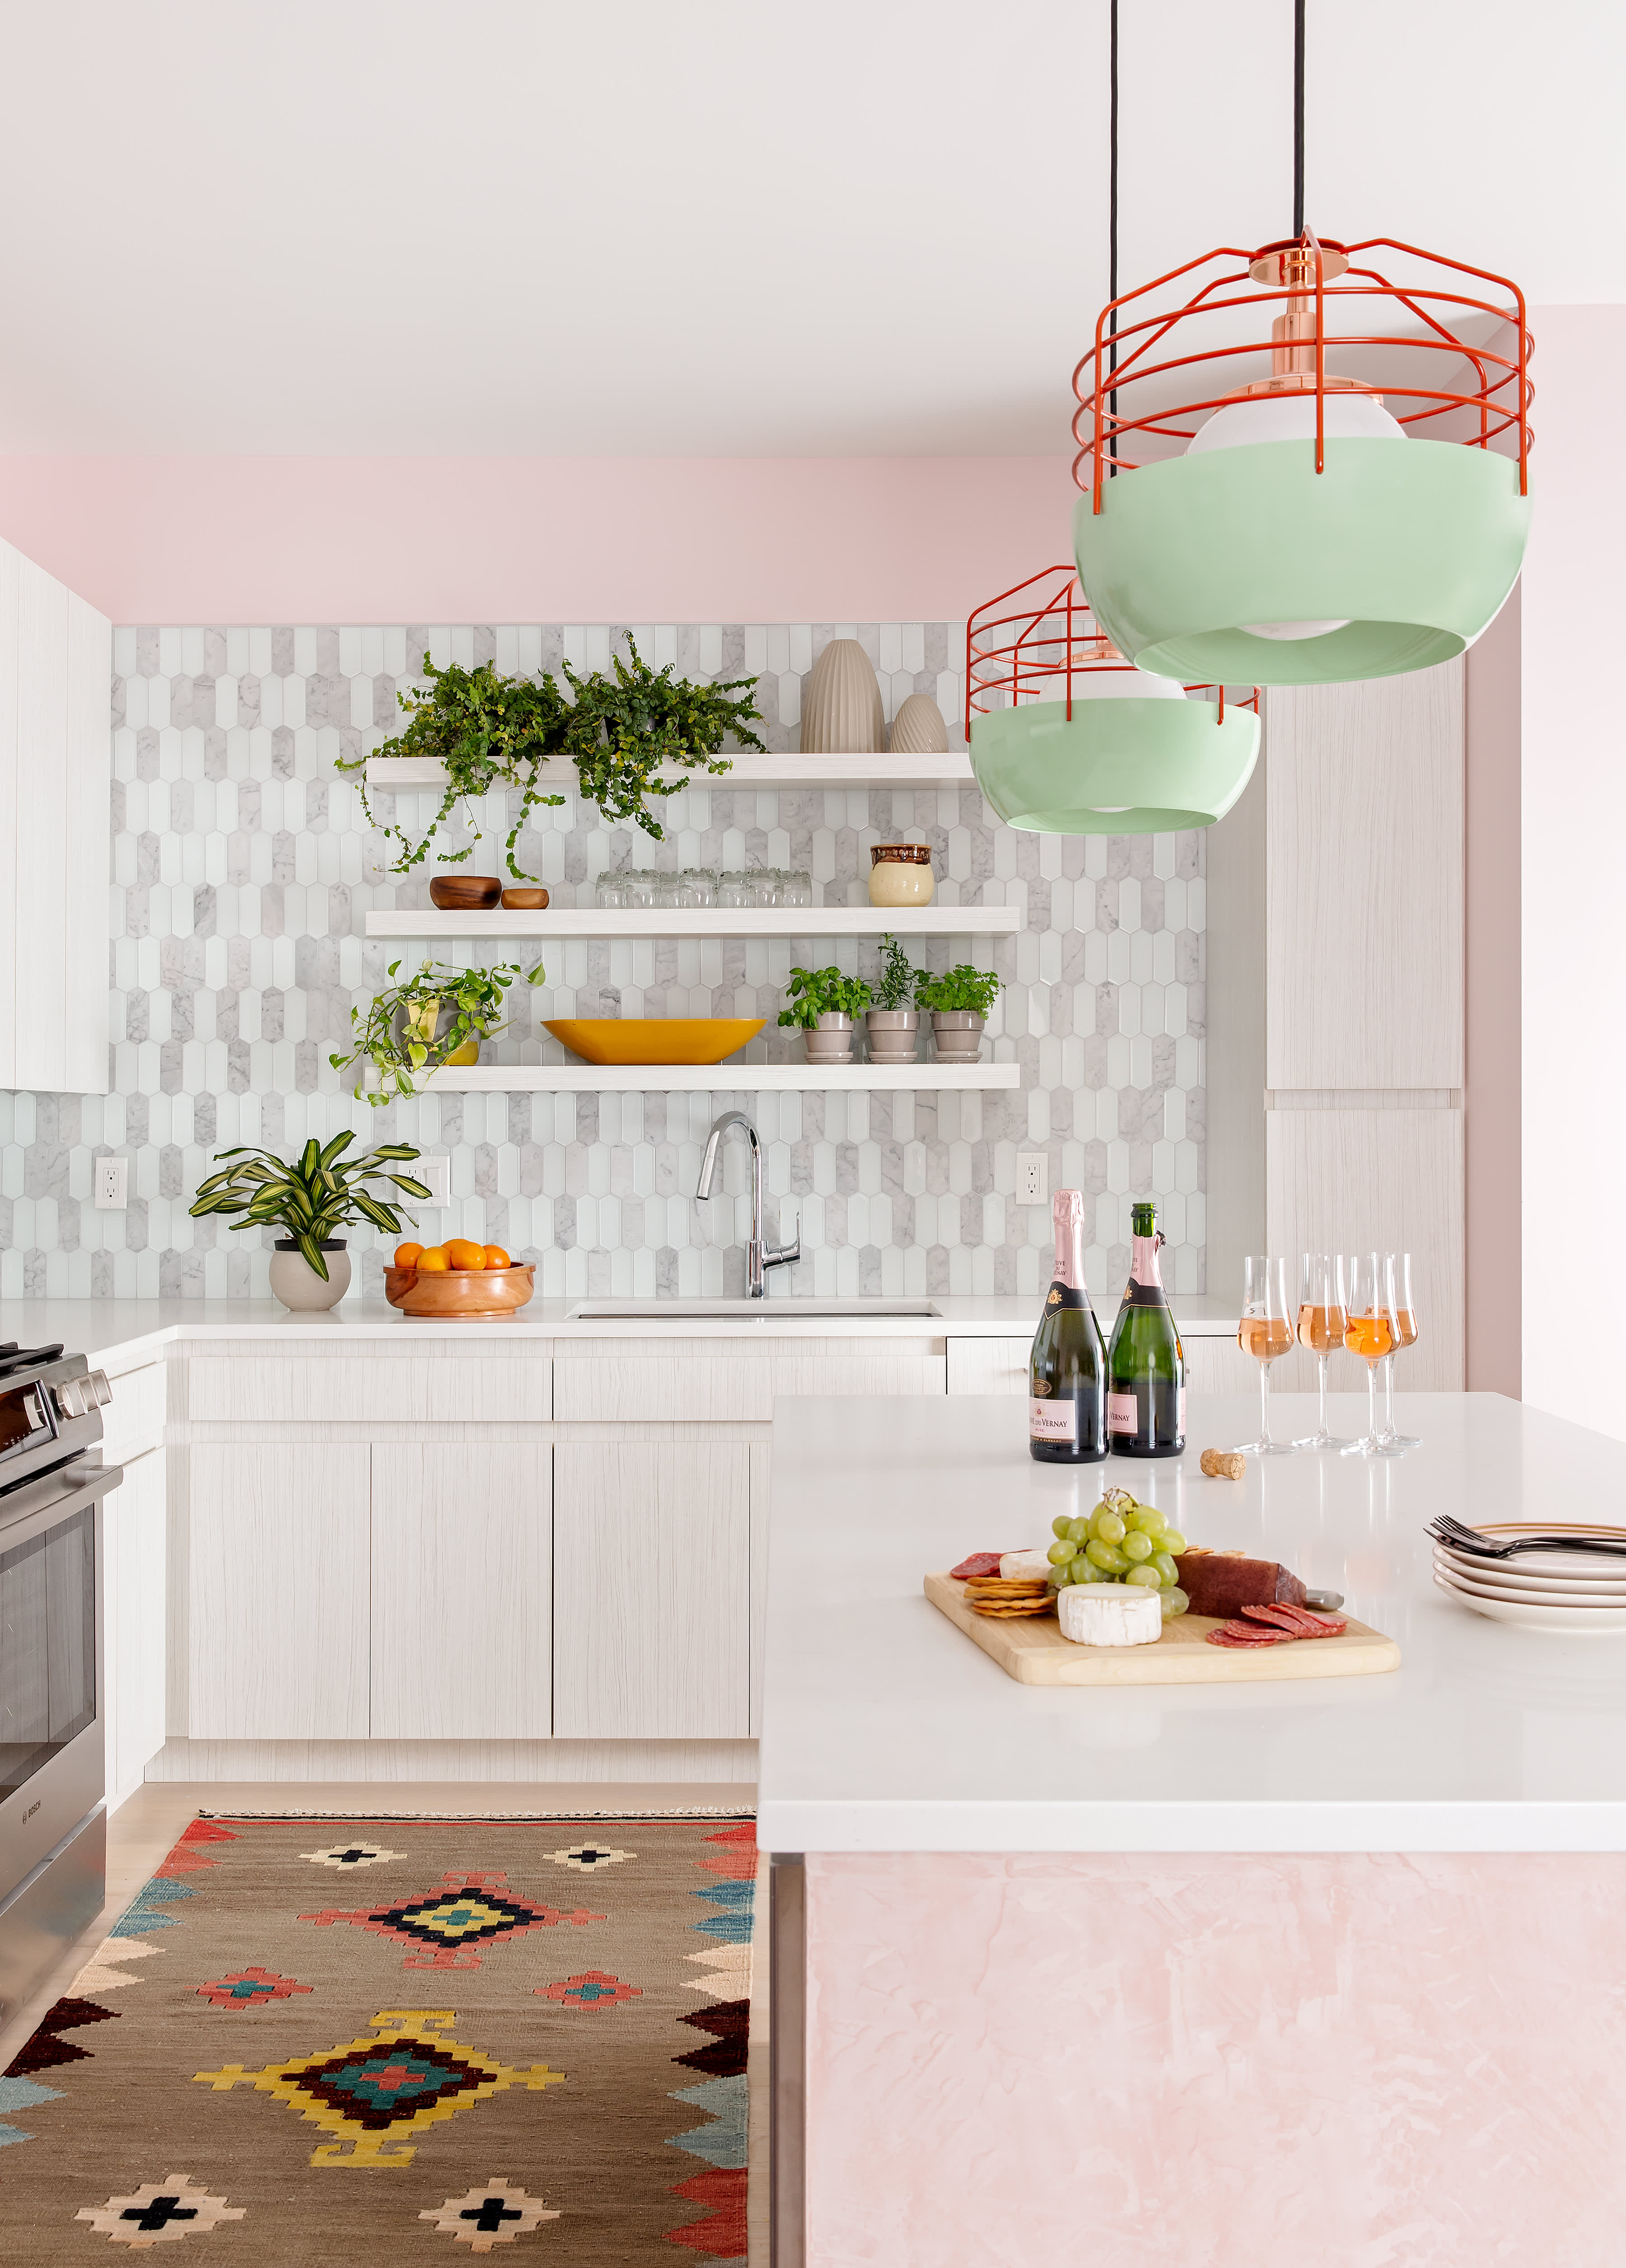 What Colors Go With Light Pink? 9 of the Best Options